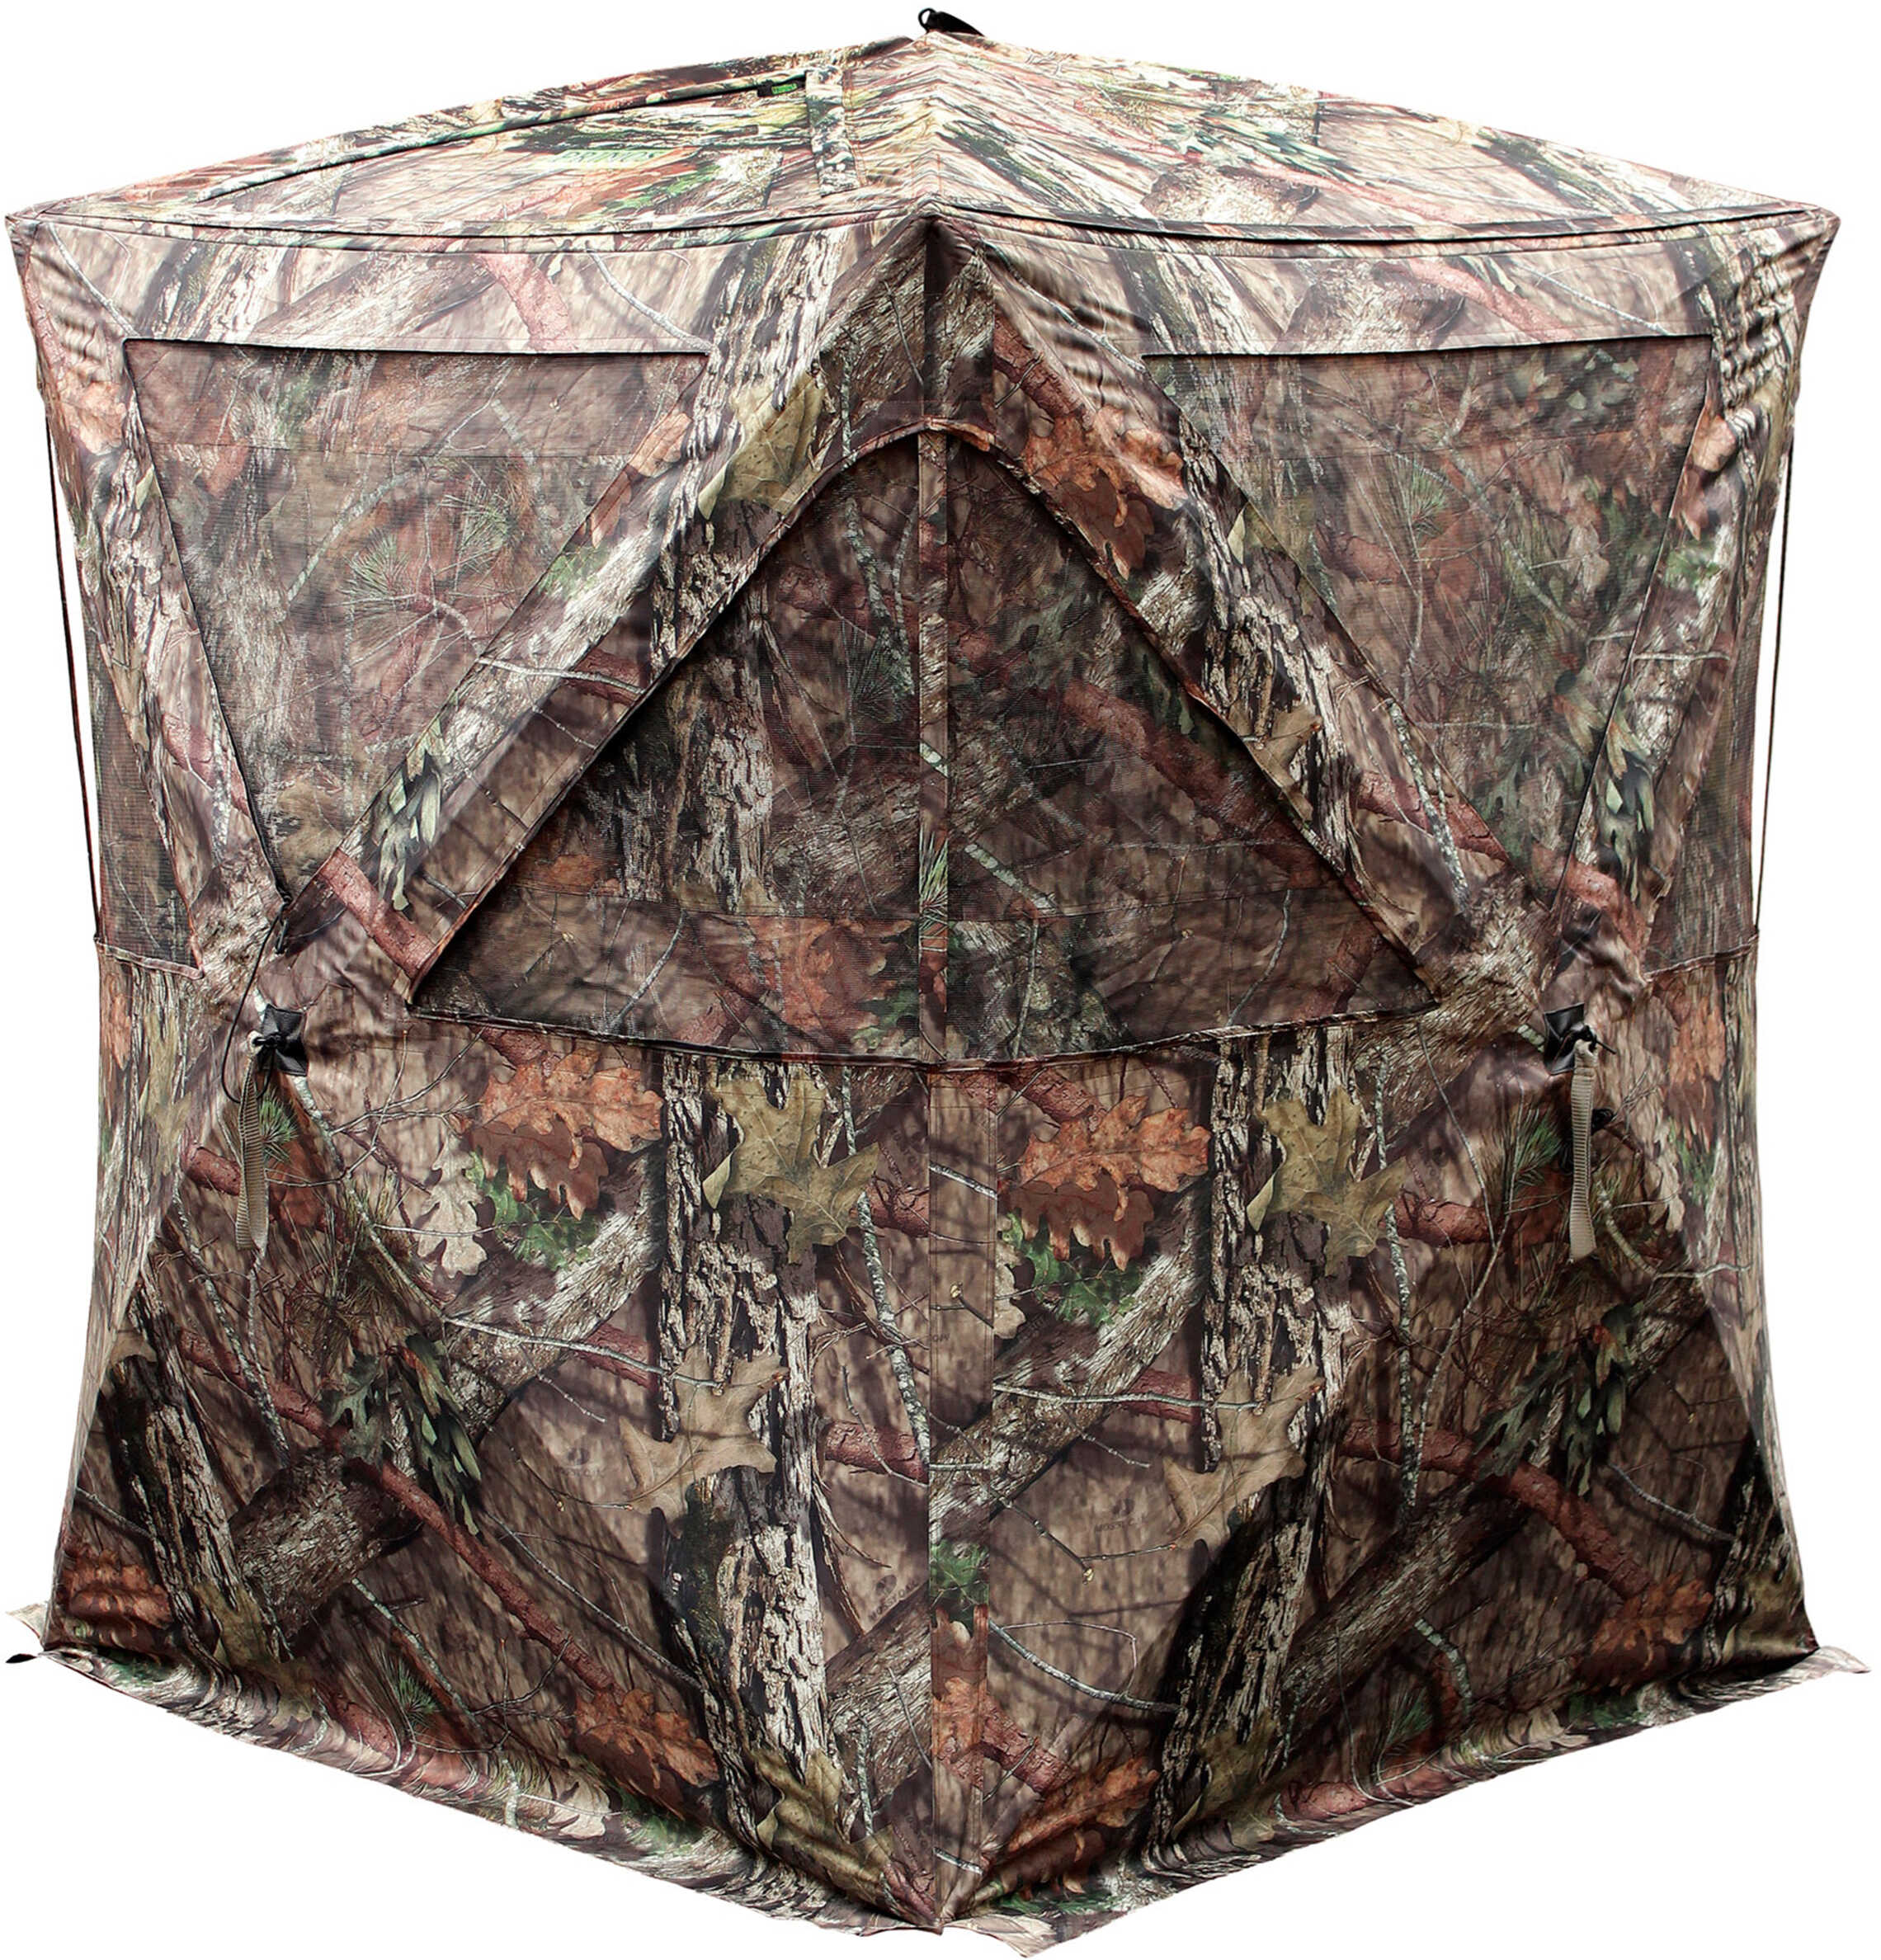 Primos Club X-Large, Mossy Oak Break-Up Country Hunting Blind Md: 65107